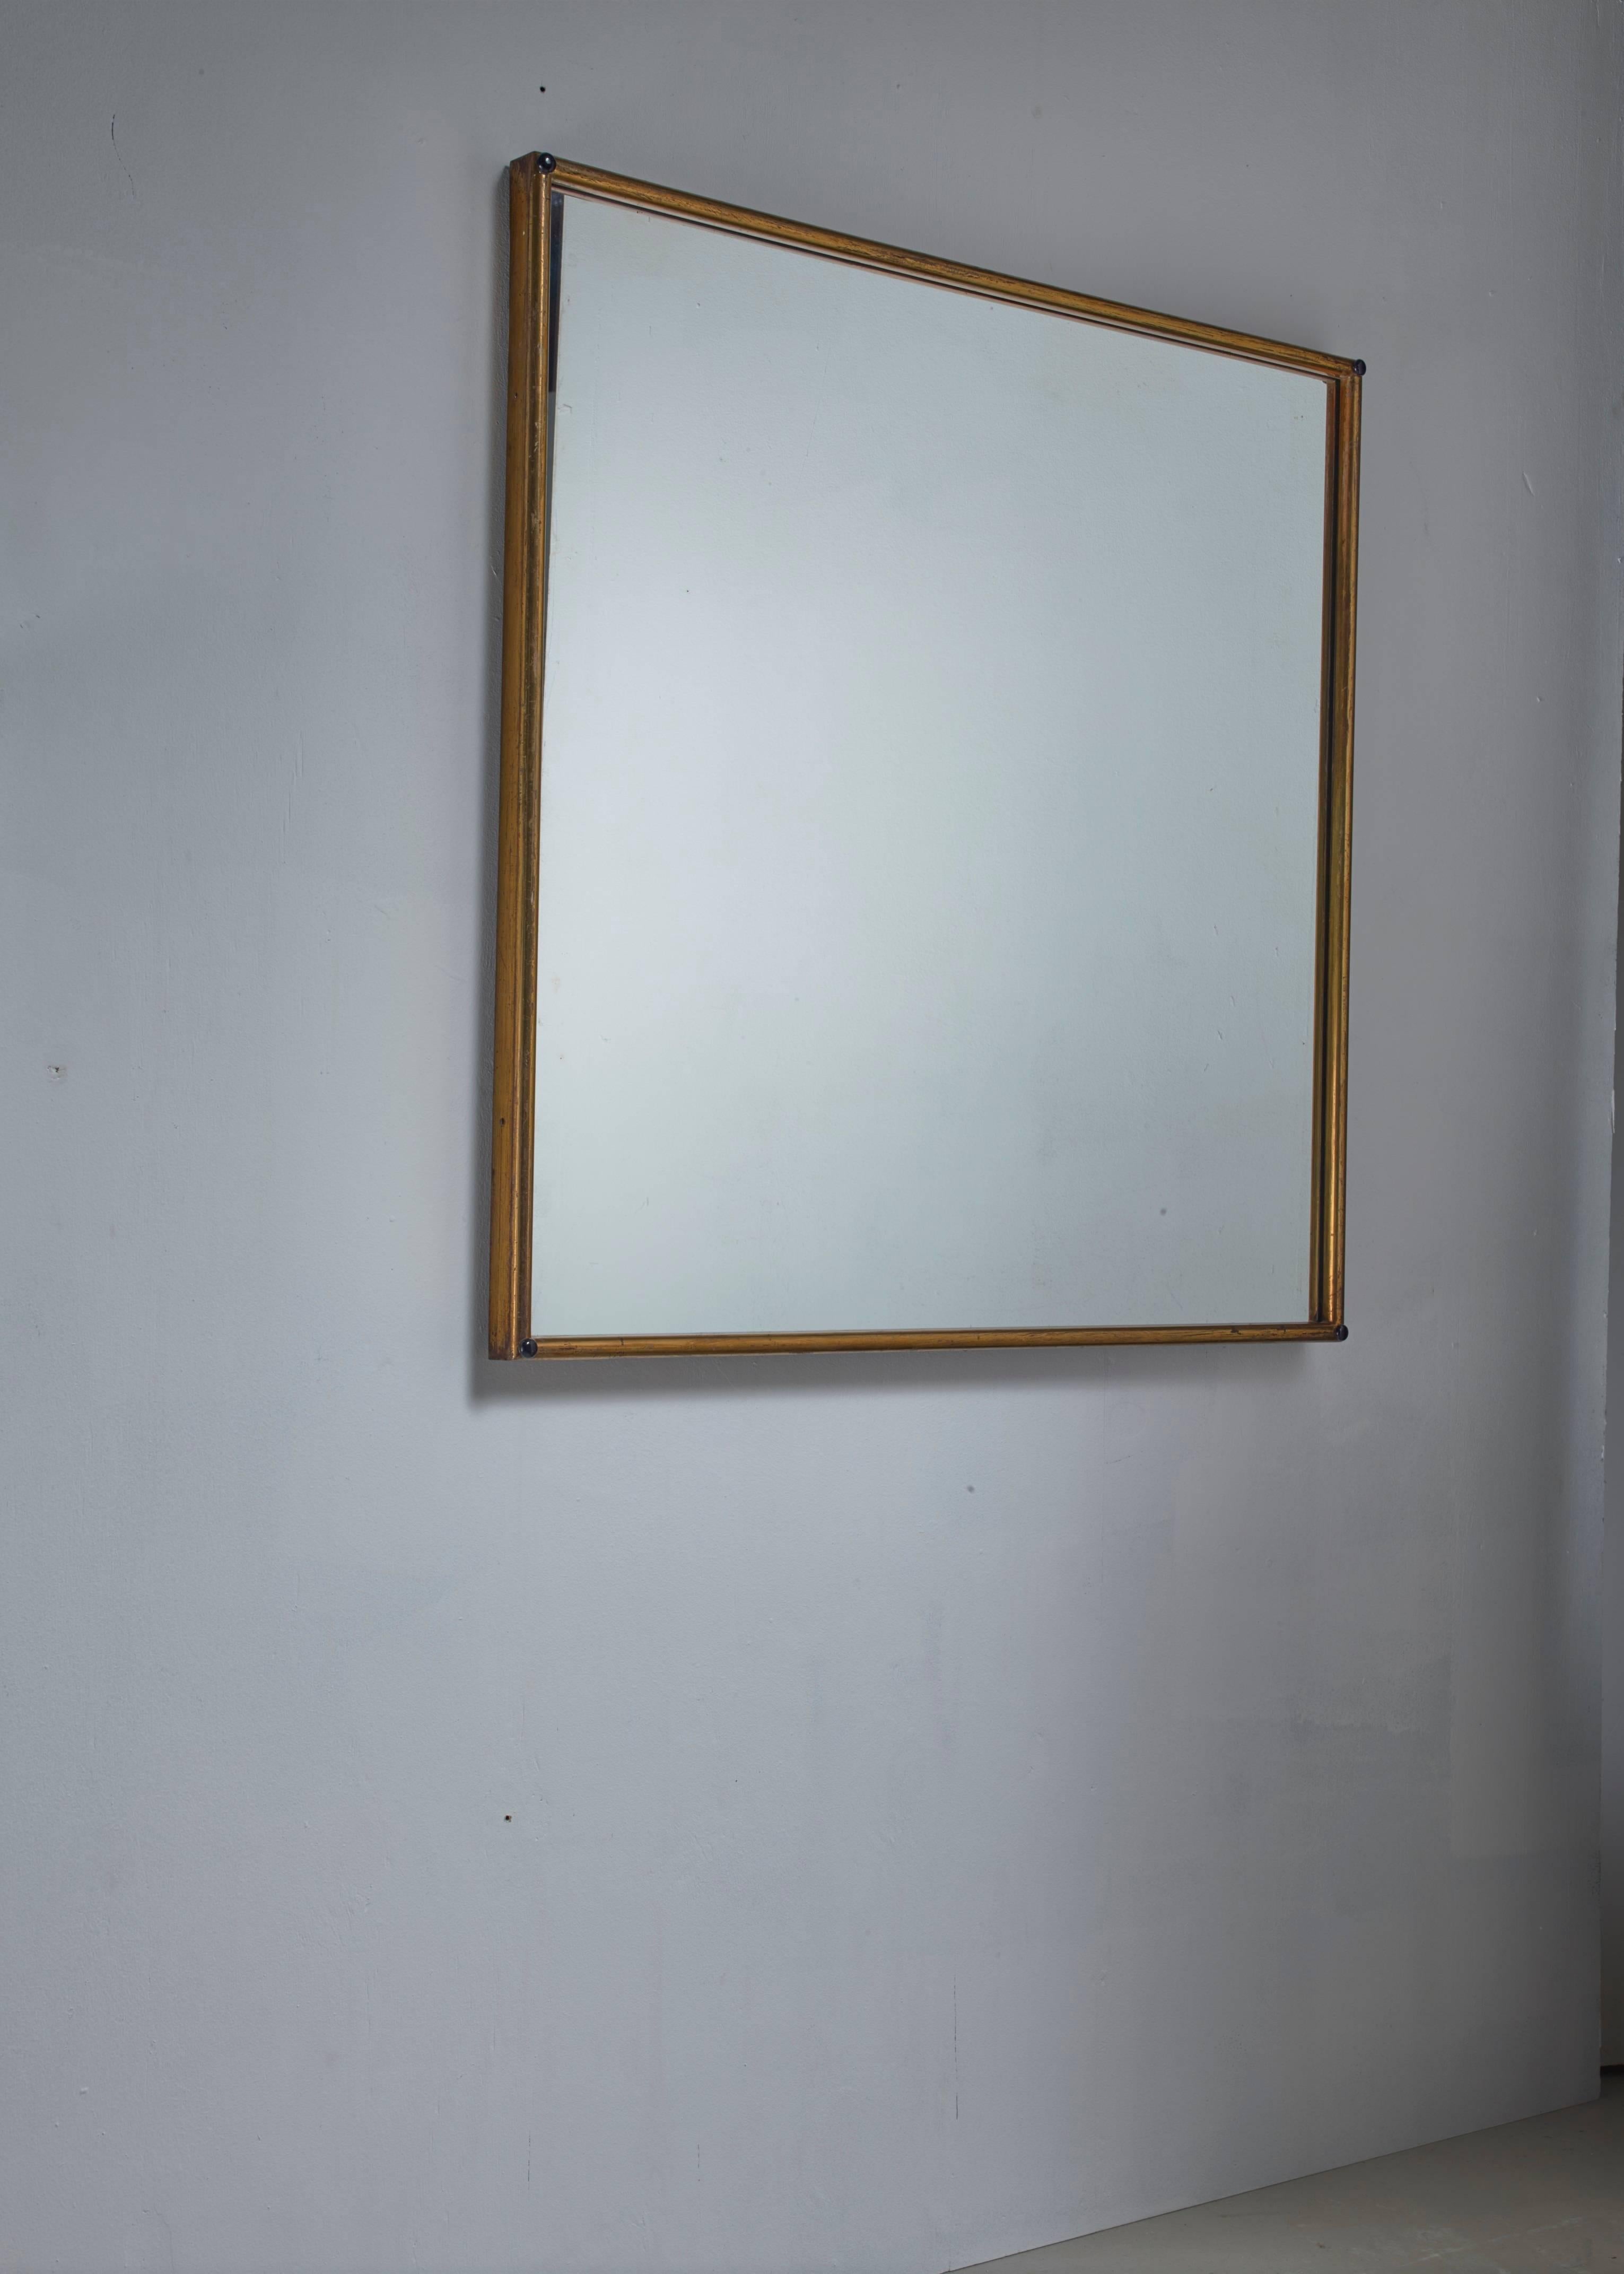 A large Italian wall mirror in a square brass frame.